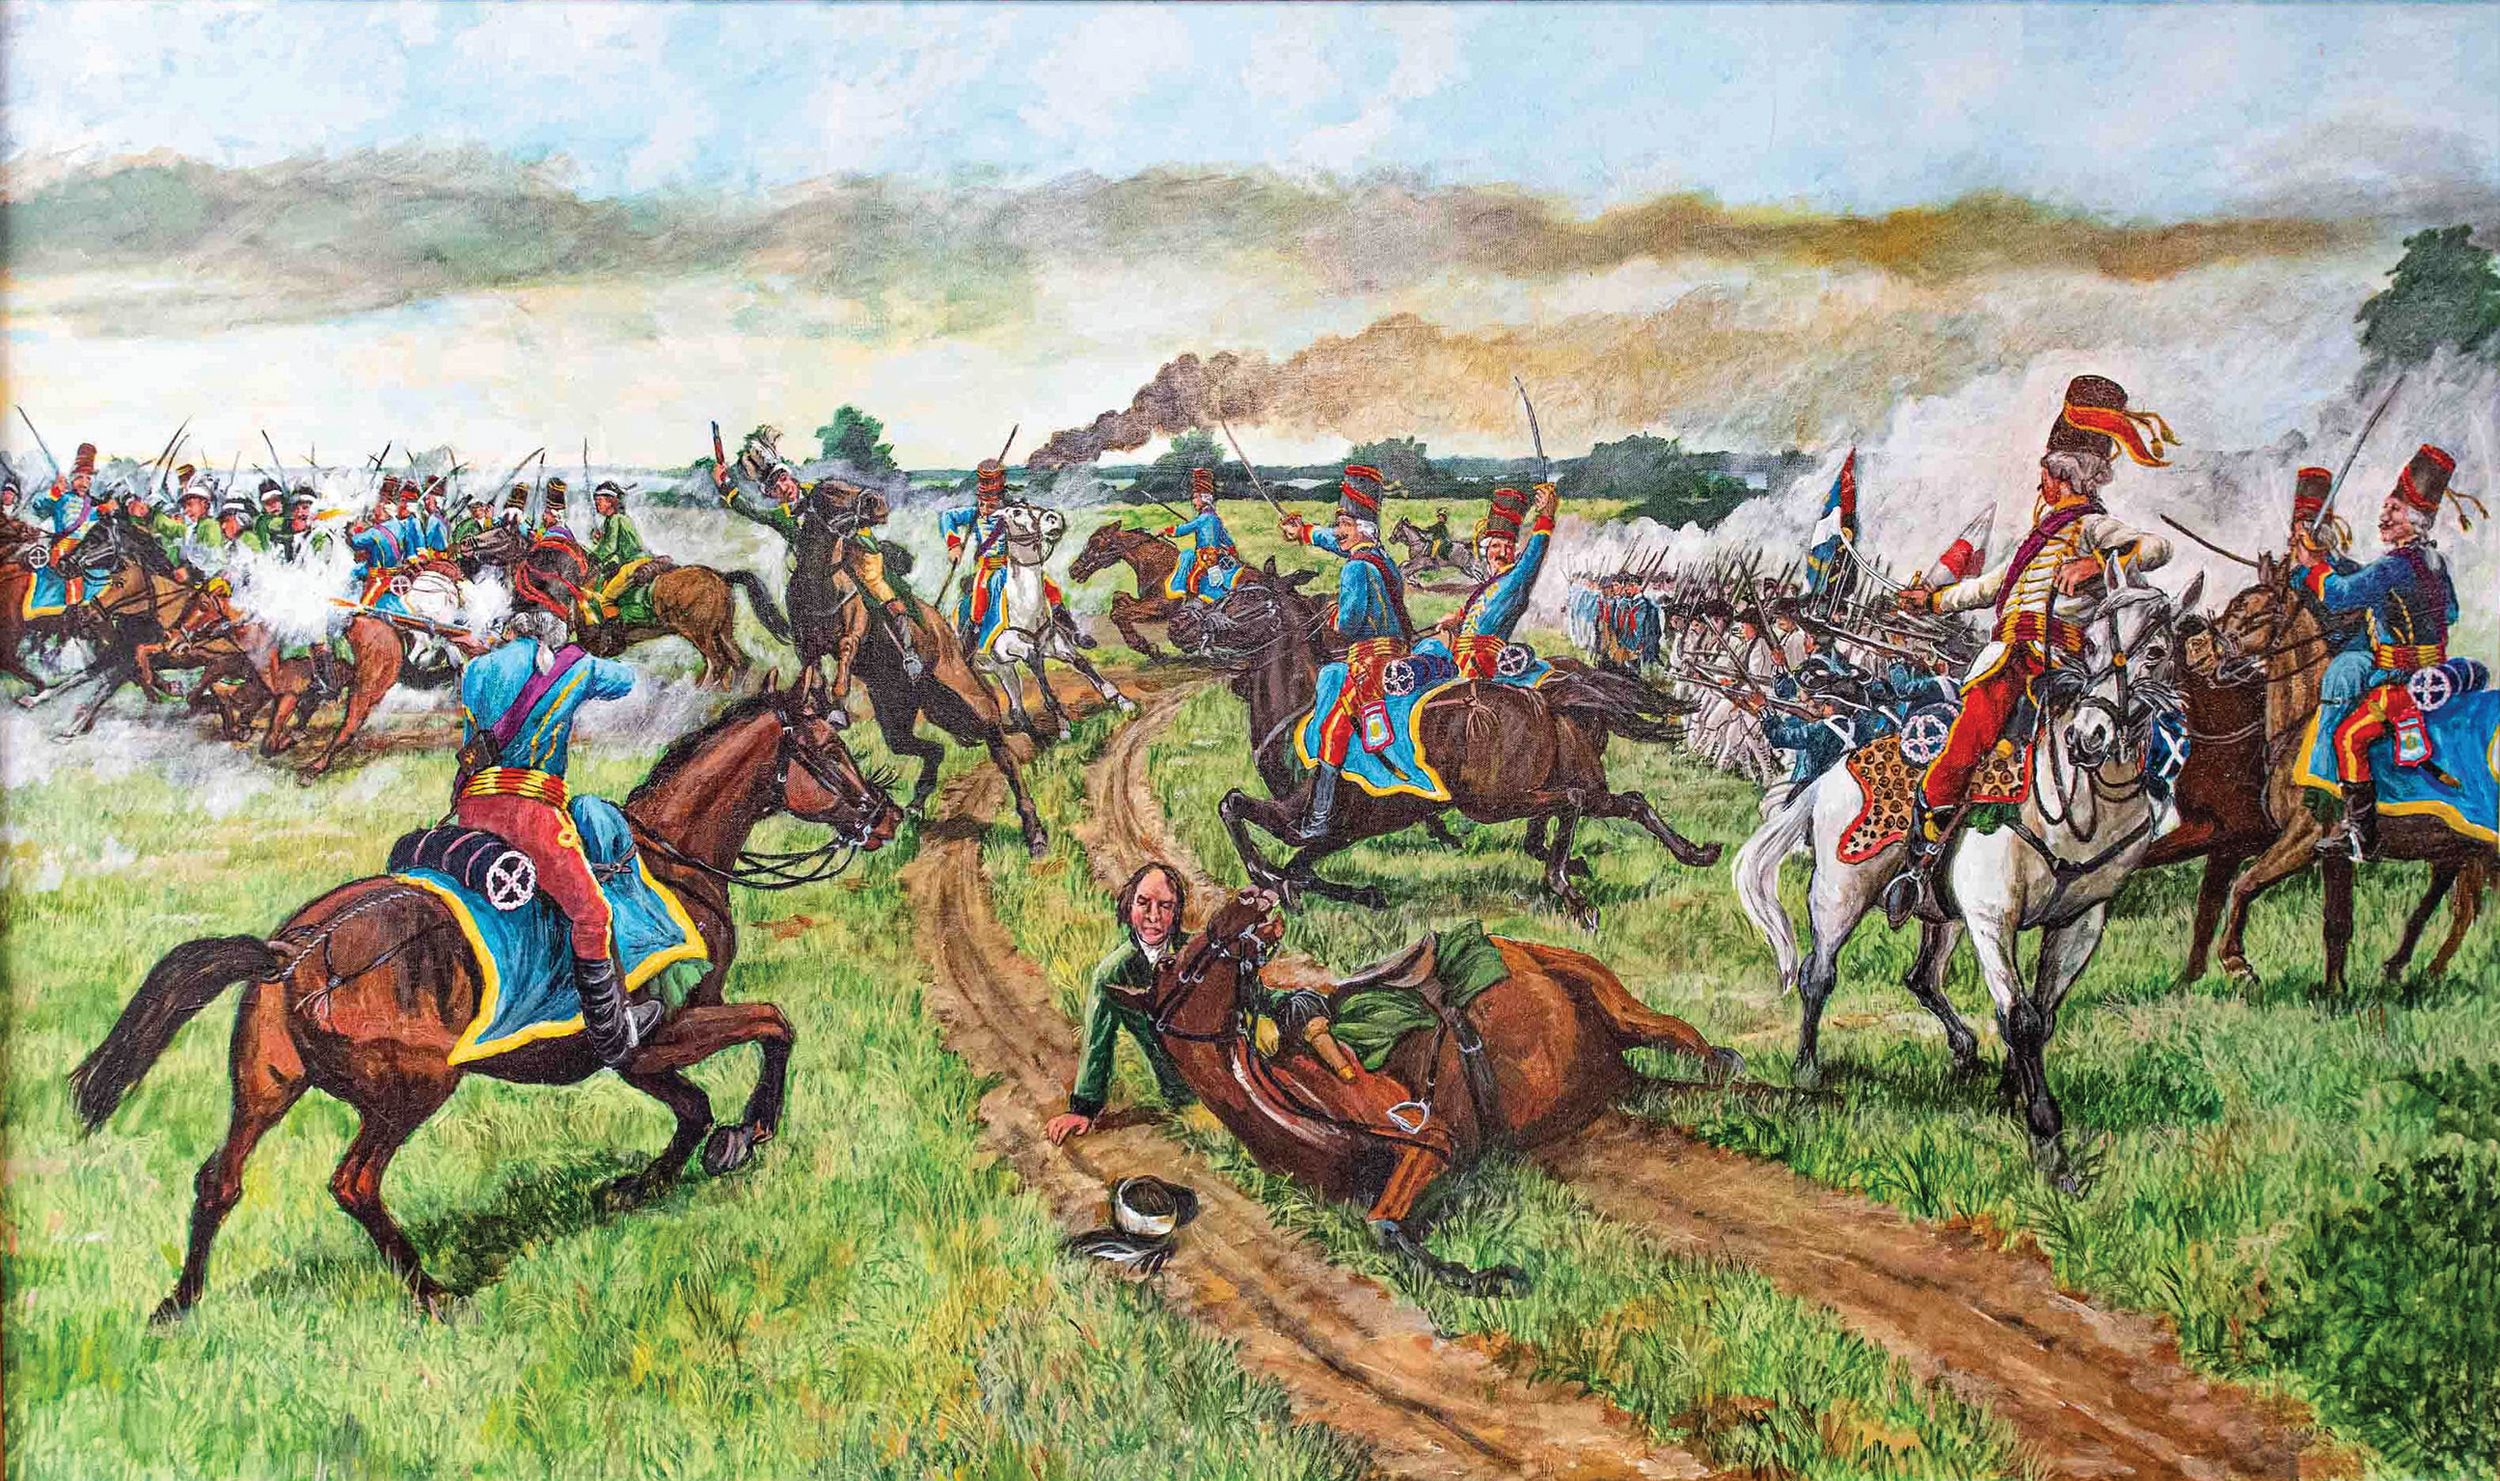 Lieutenant-Colonel Banastre Tarleton is shown center, thrown from his horse as the Duc de Lauzun rides by on a white horse. Mercer’s Virginians and French infantry fire on the British in the background at right.